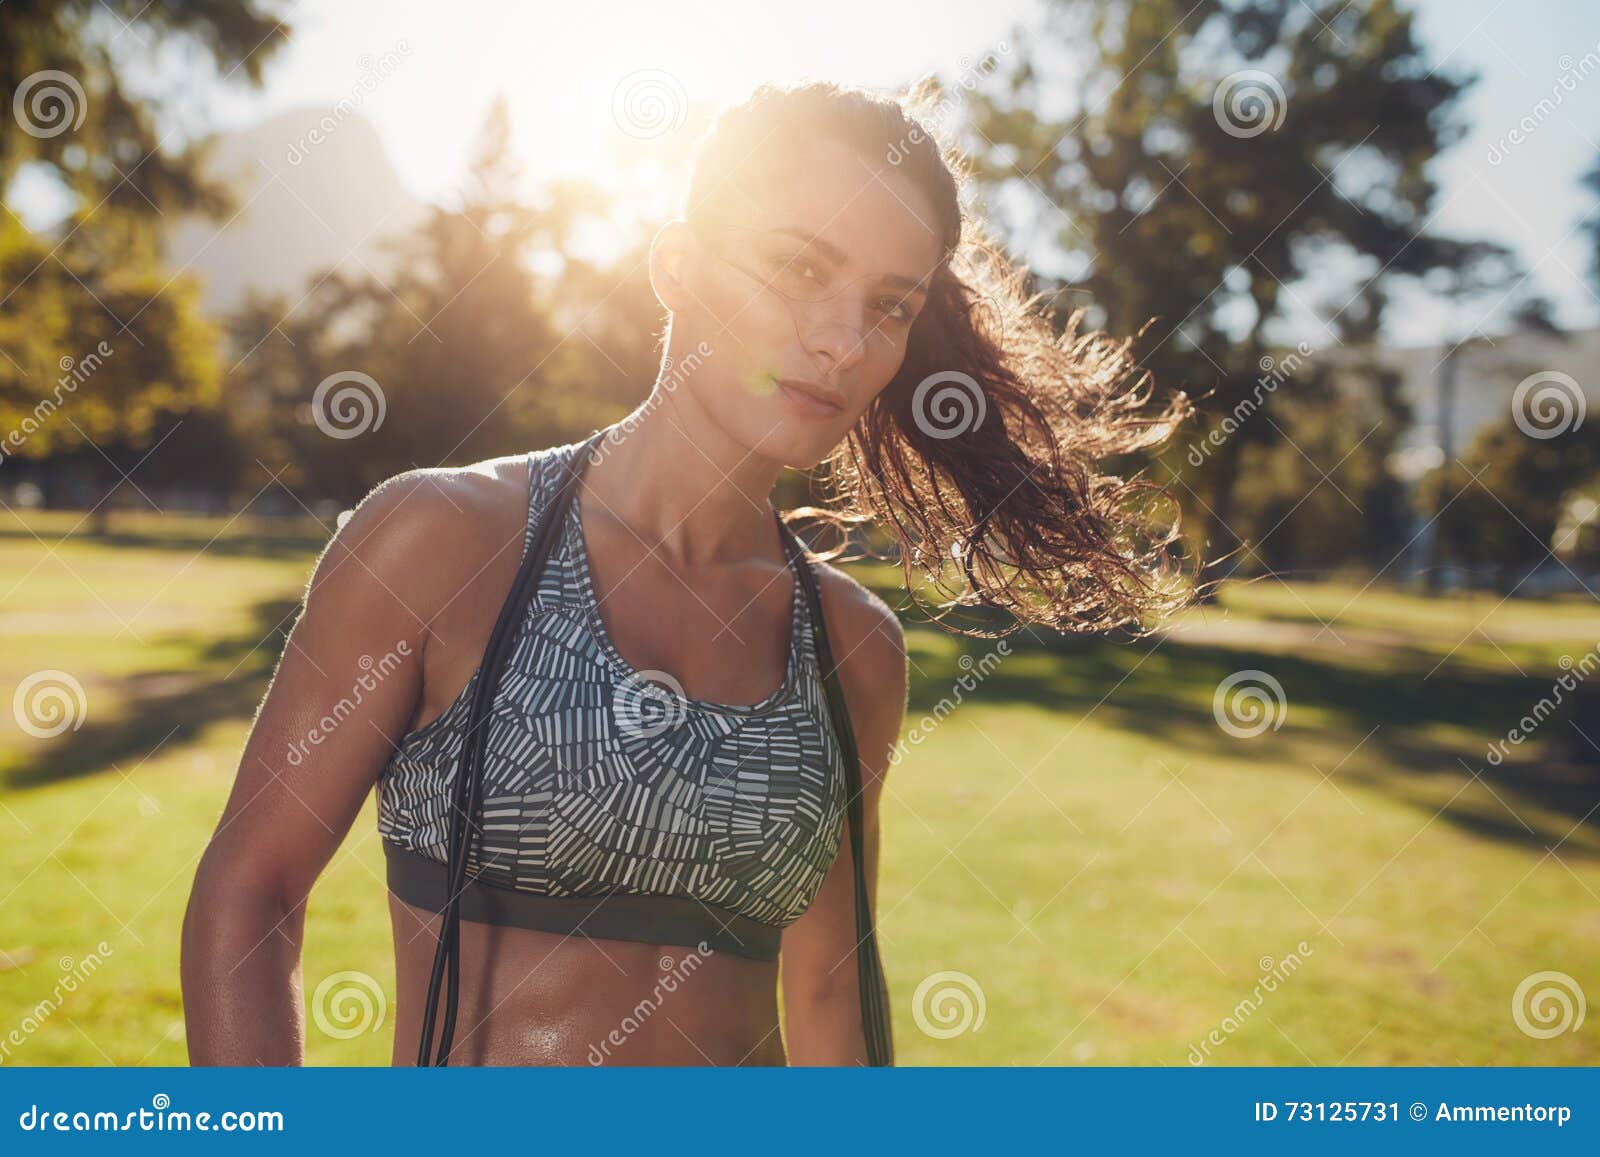 Healthy Young Woman at the Park with a Skipping Rope Stock Image